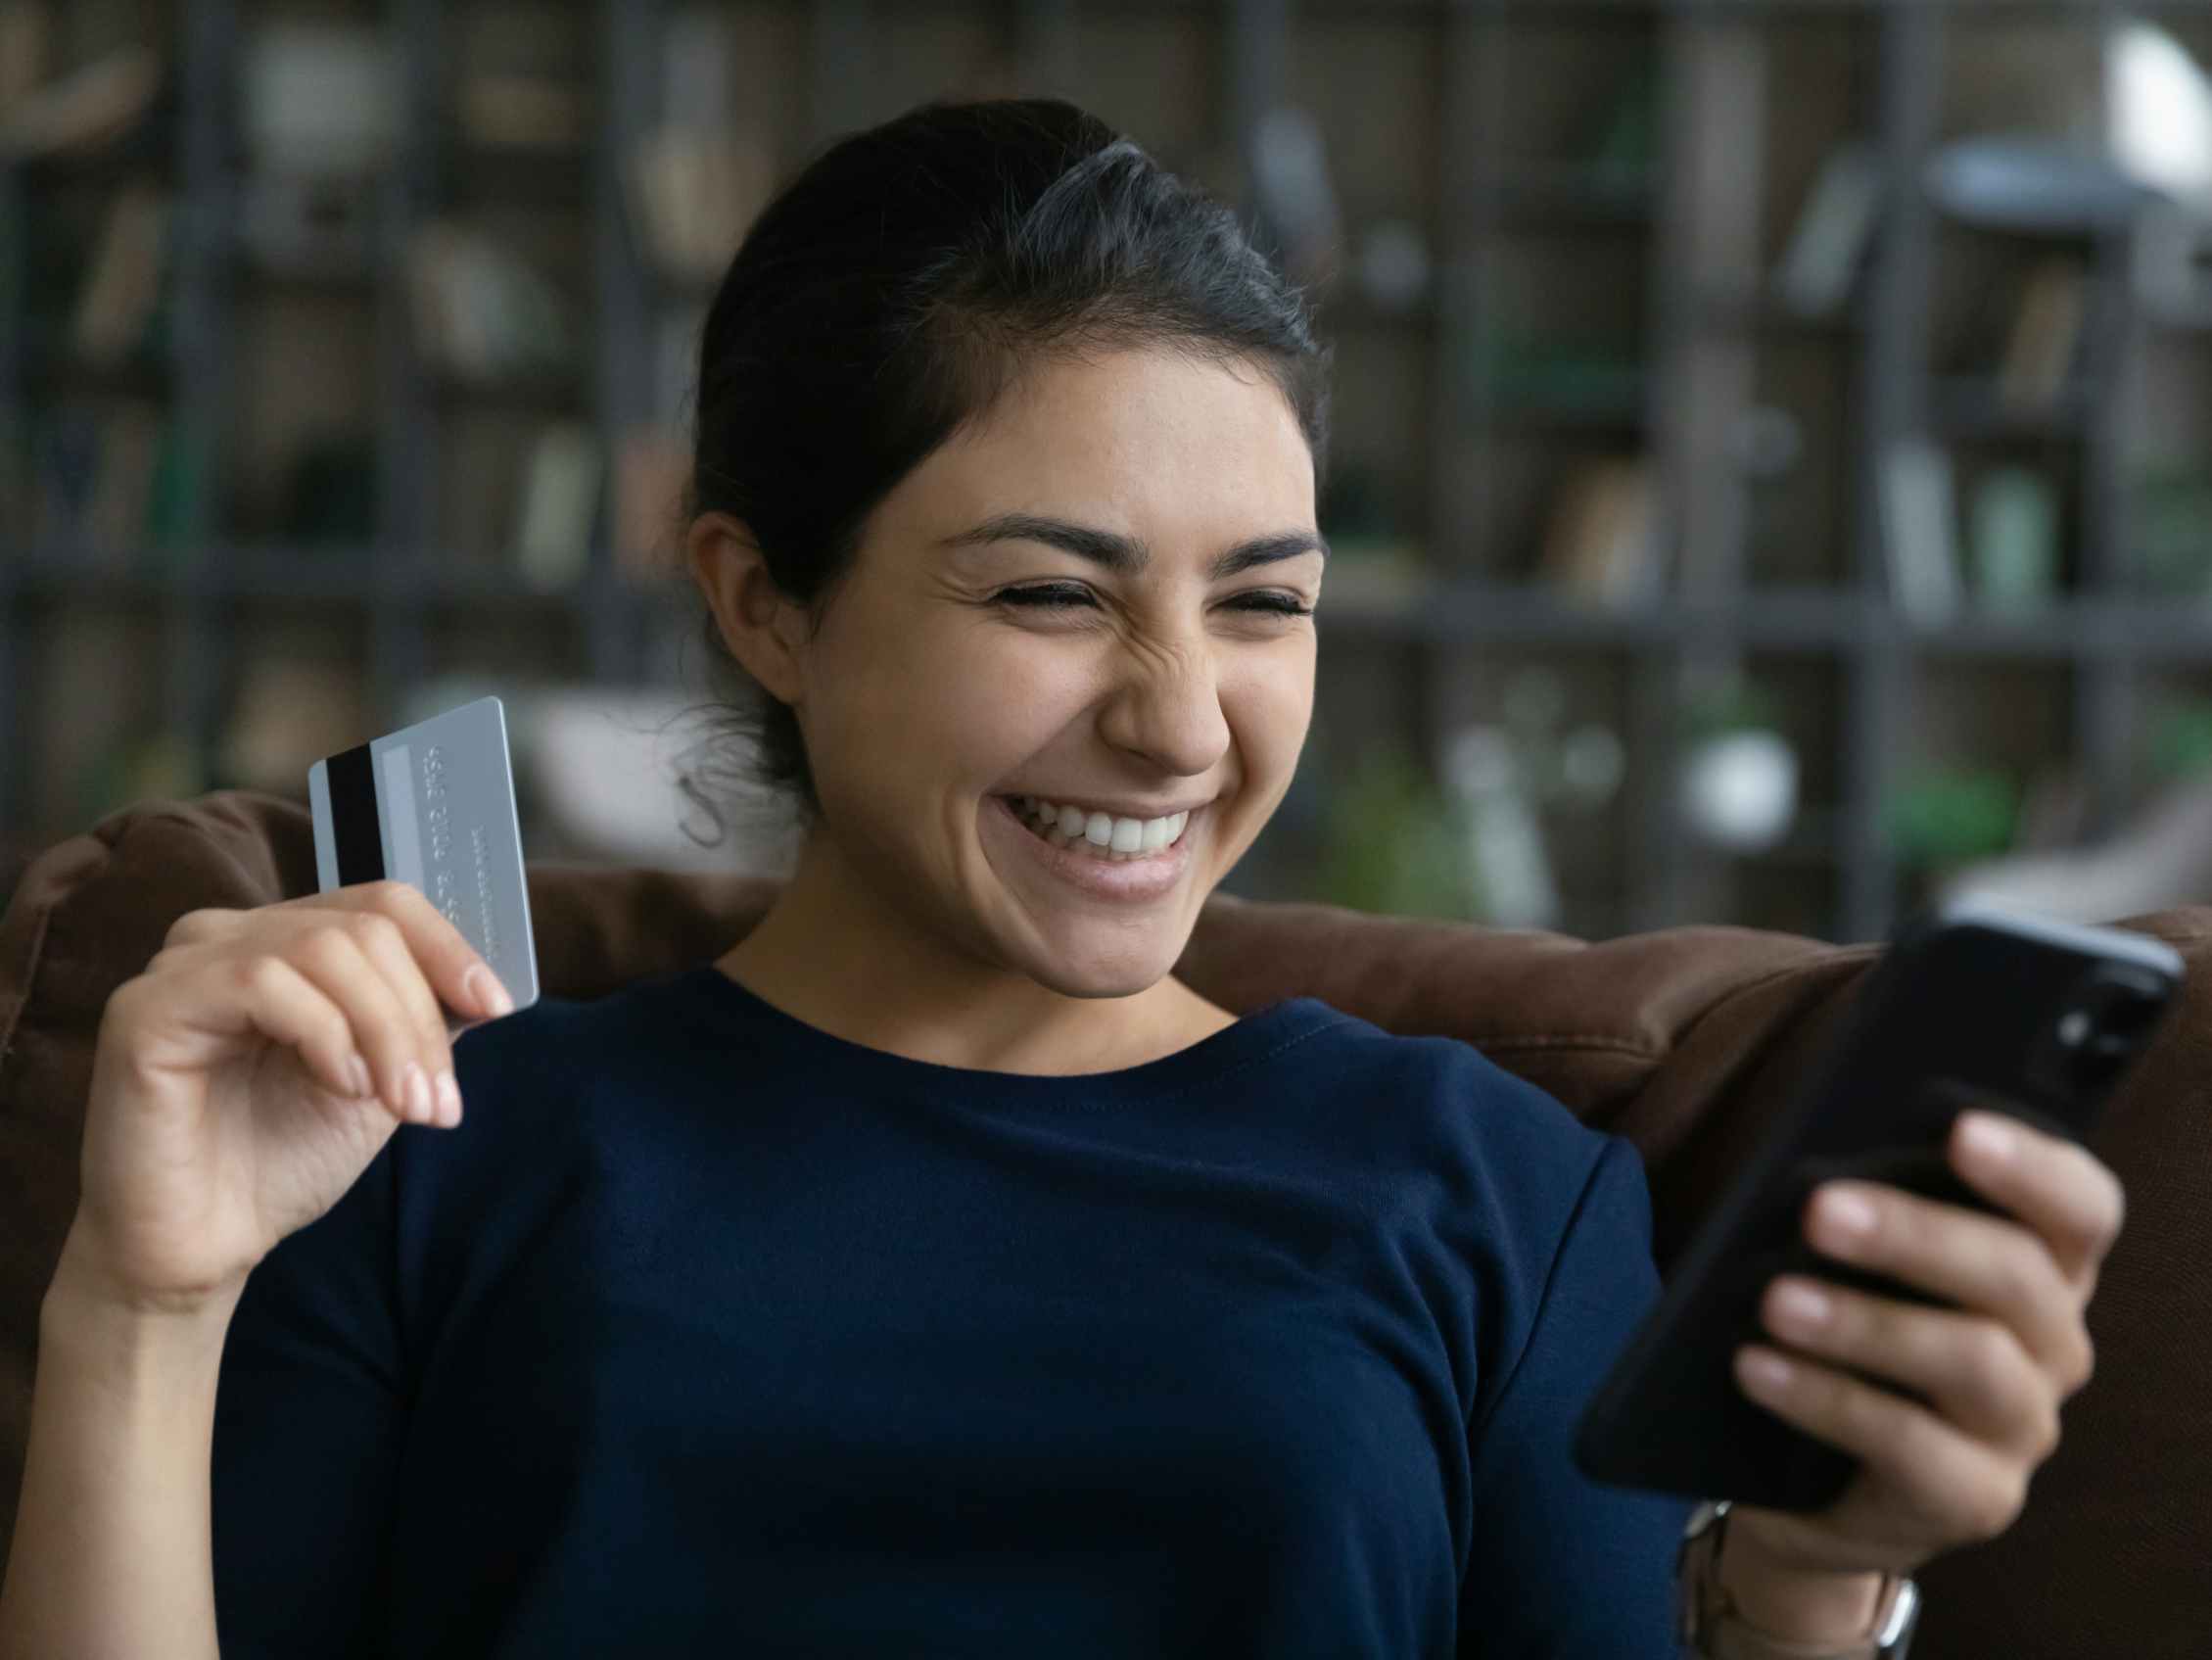 A woman grinning at her phone in one hand while holding a credit card in the other hand.